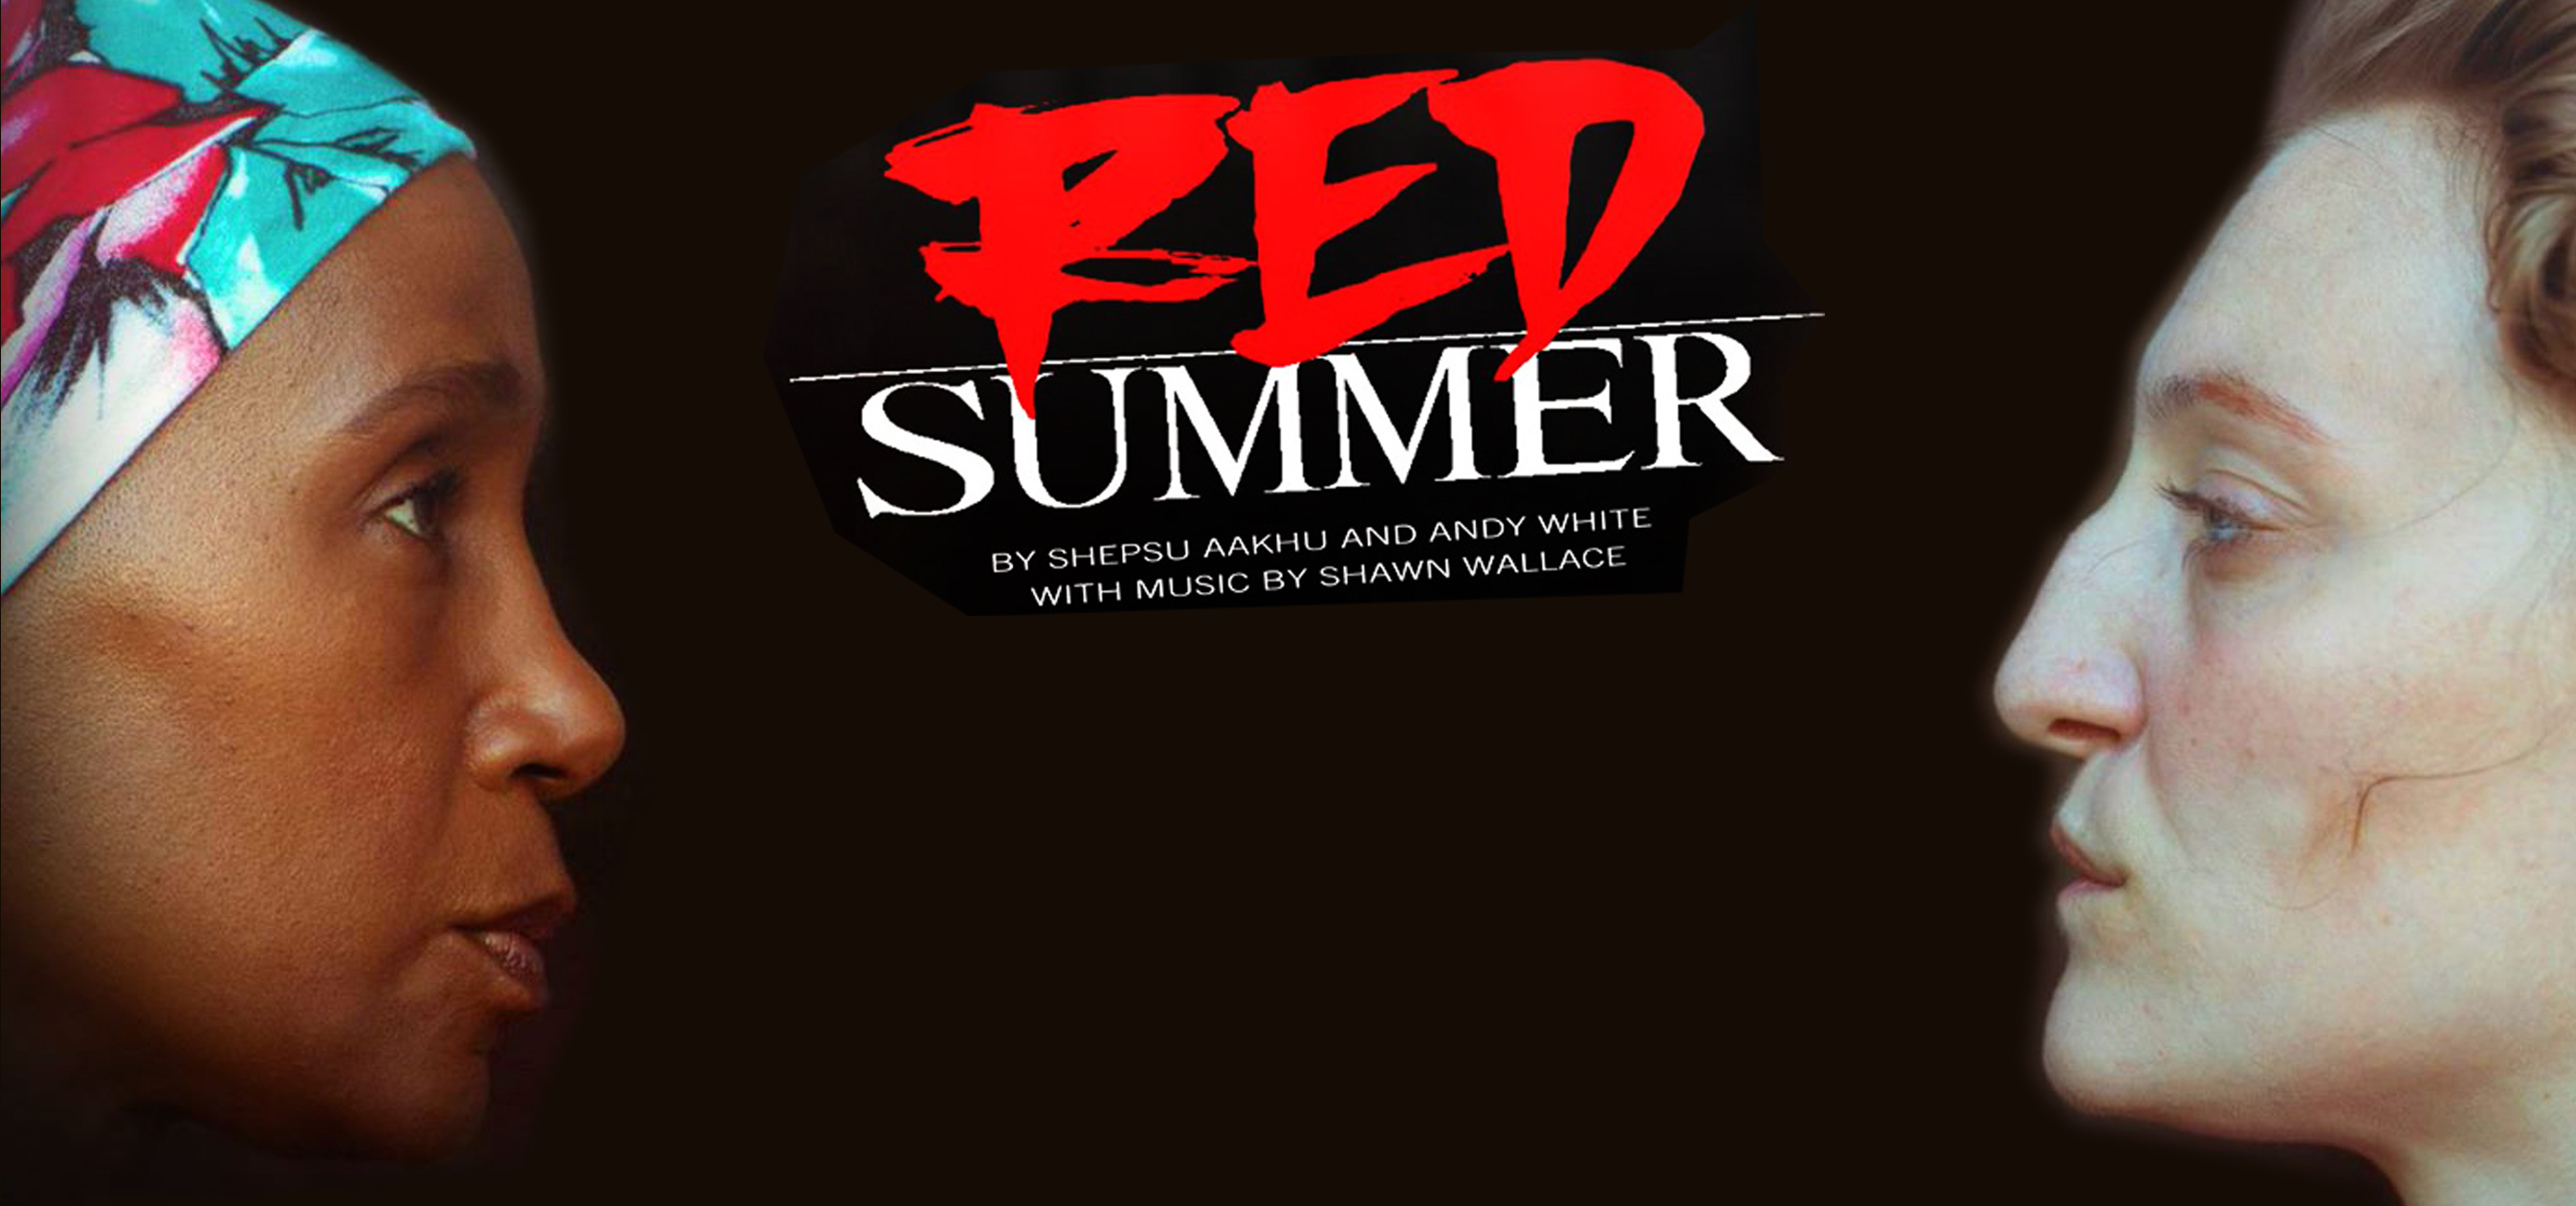 World Premiere of “Red Summer” at CPA